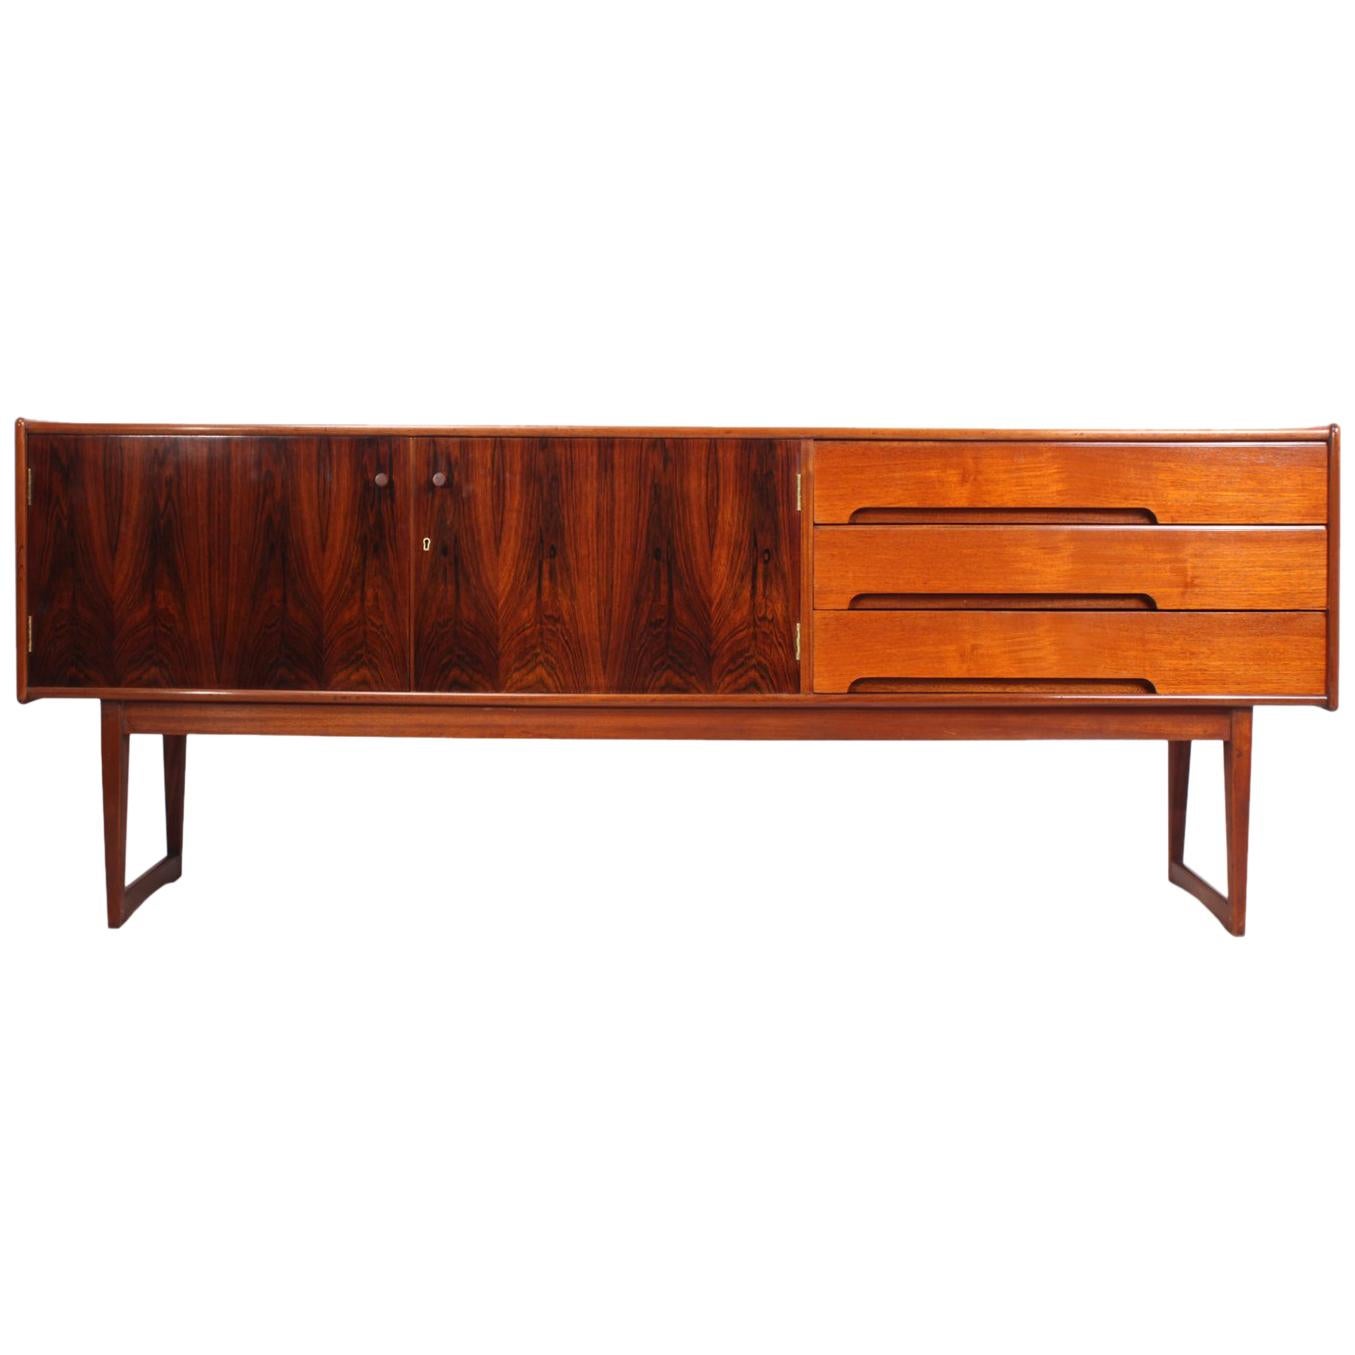 Midcentury Rosewood and Teak Sideboard by Younger